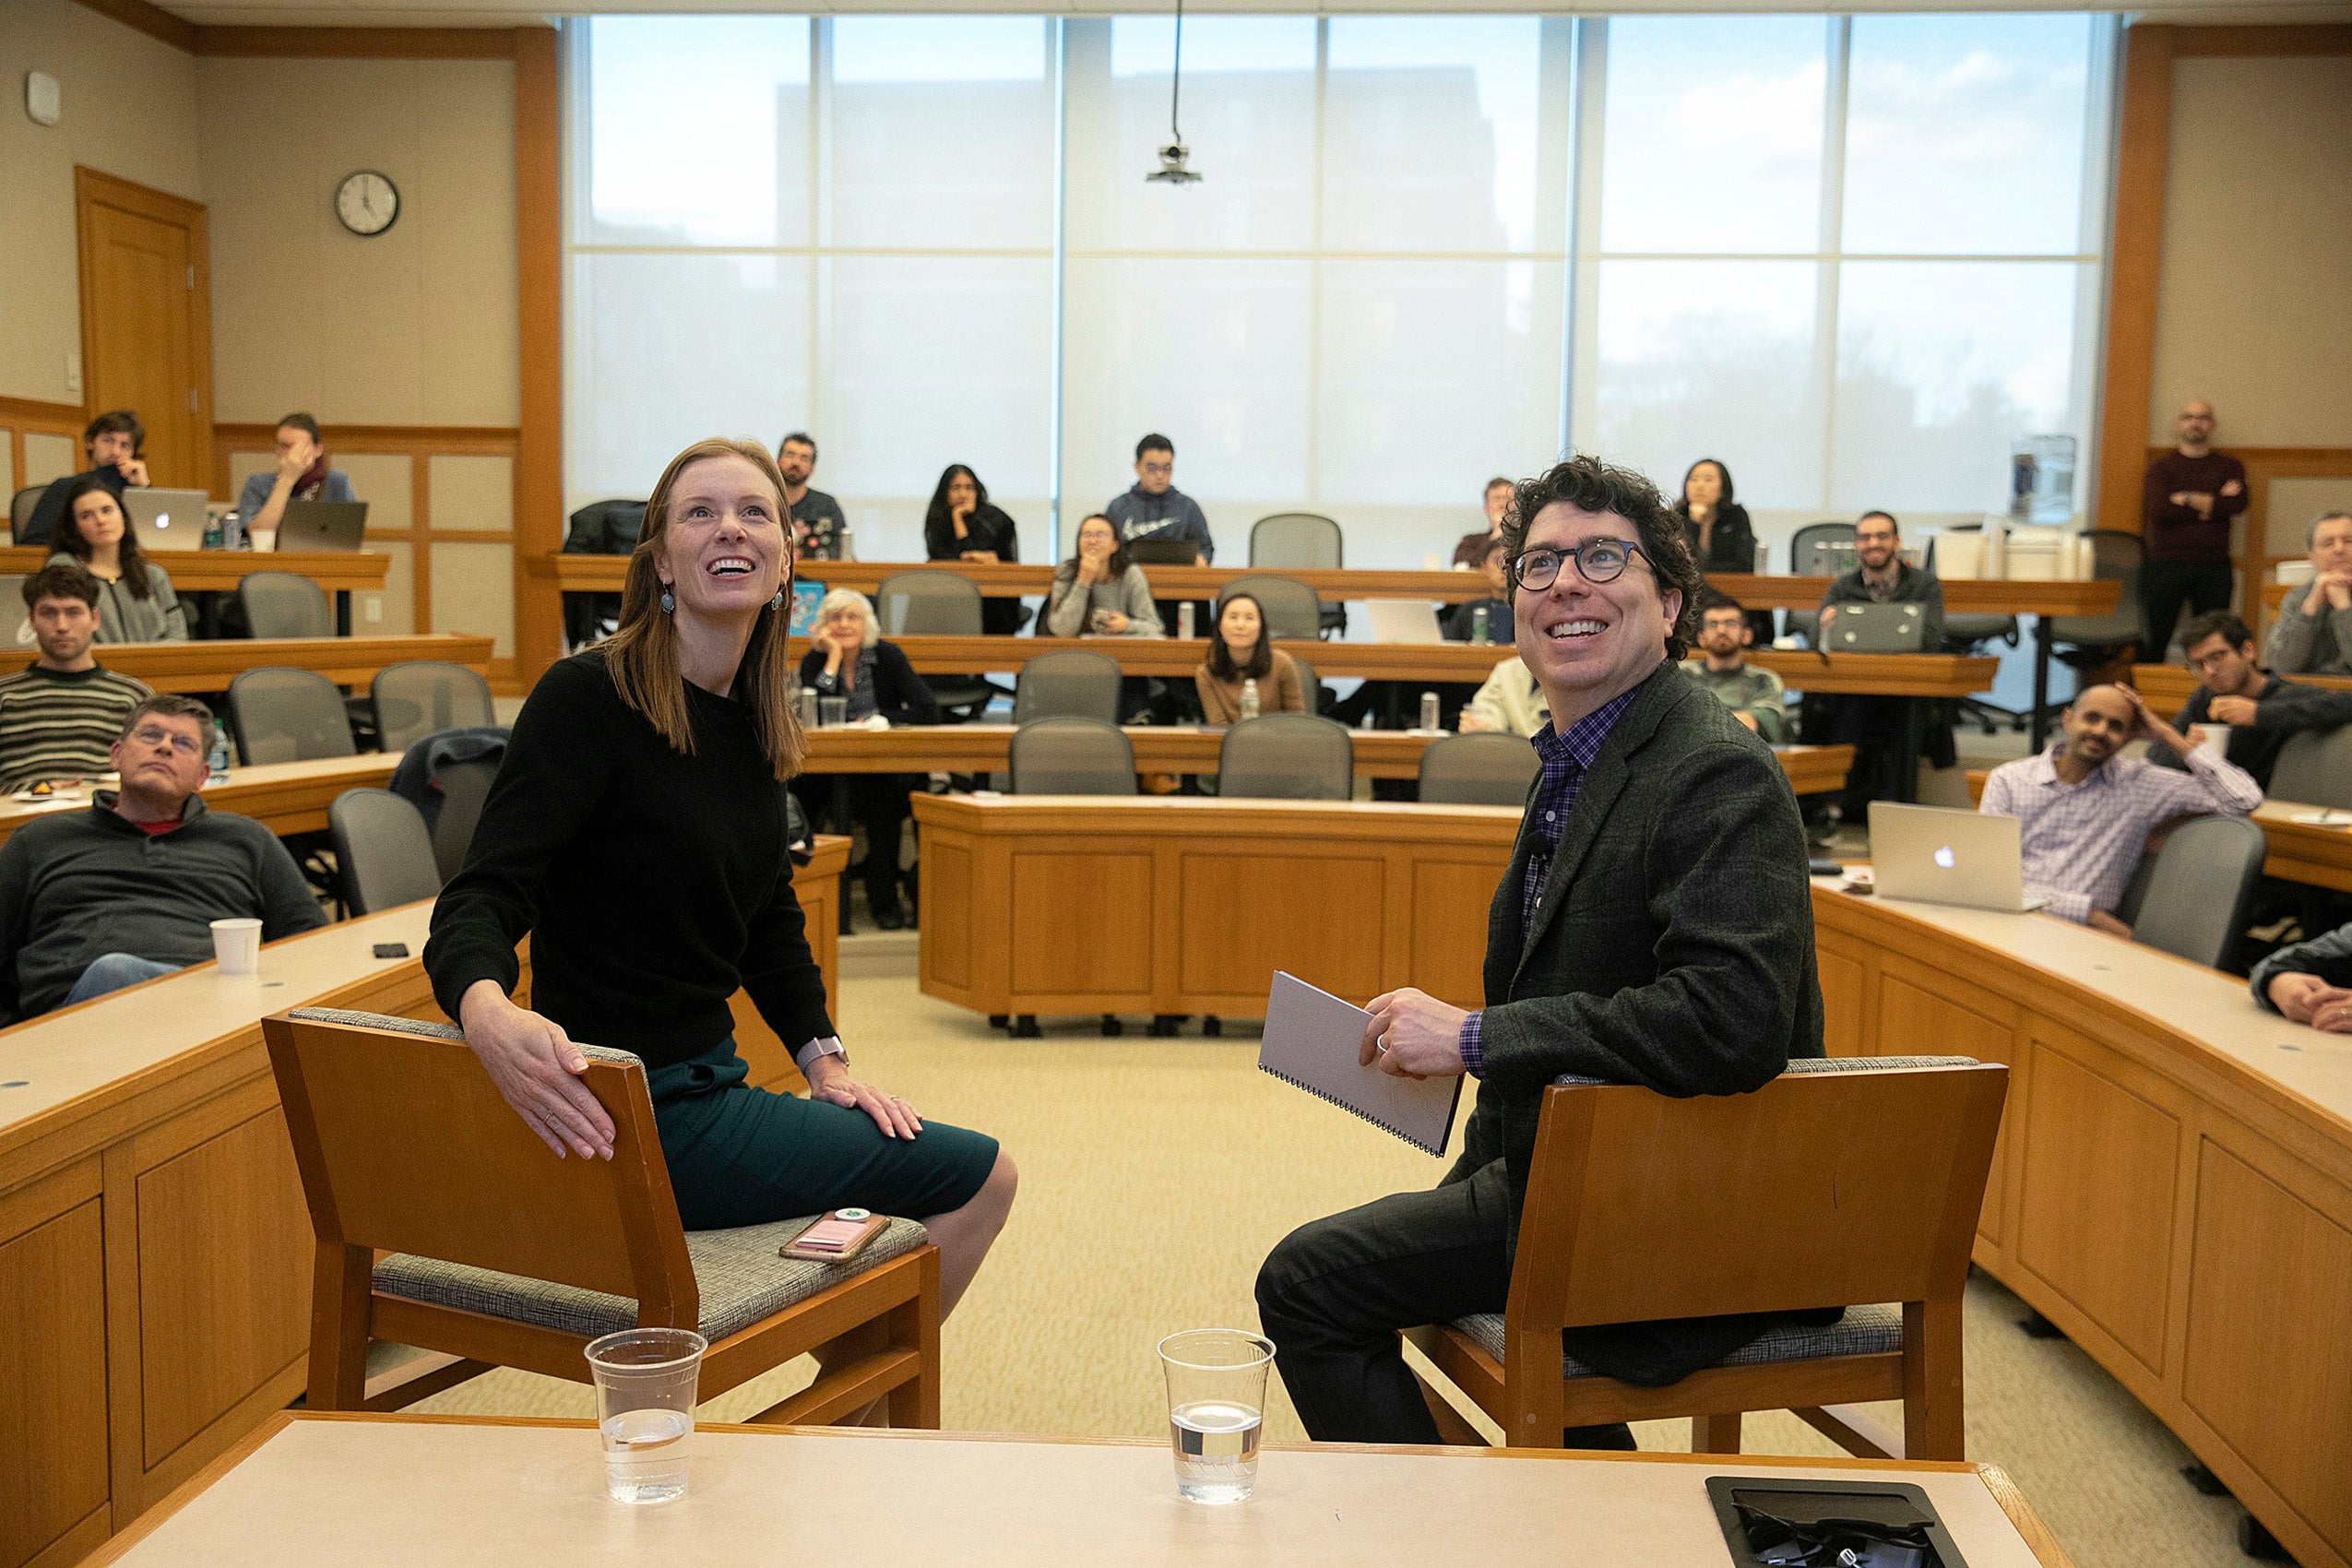 Monika Bickert and Jonathan Zittrain seated at the front of a classroom smiling and looking up at a screen